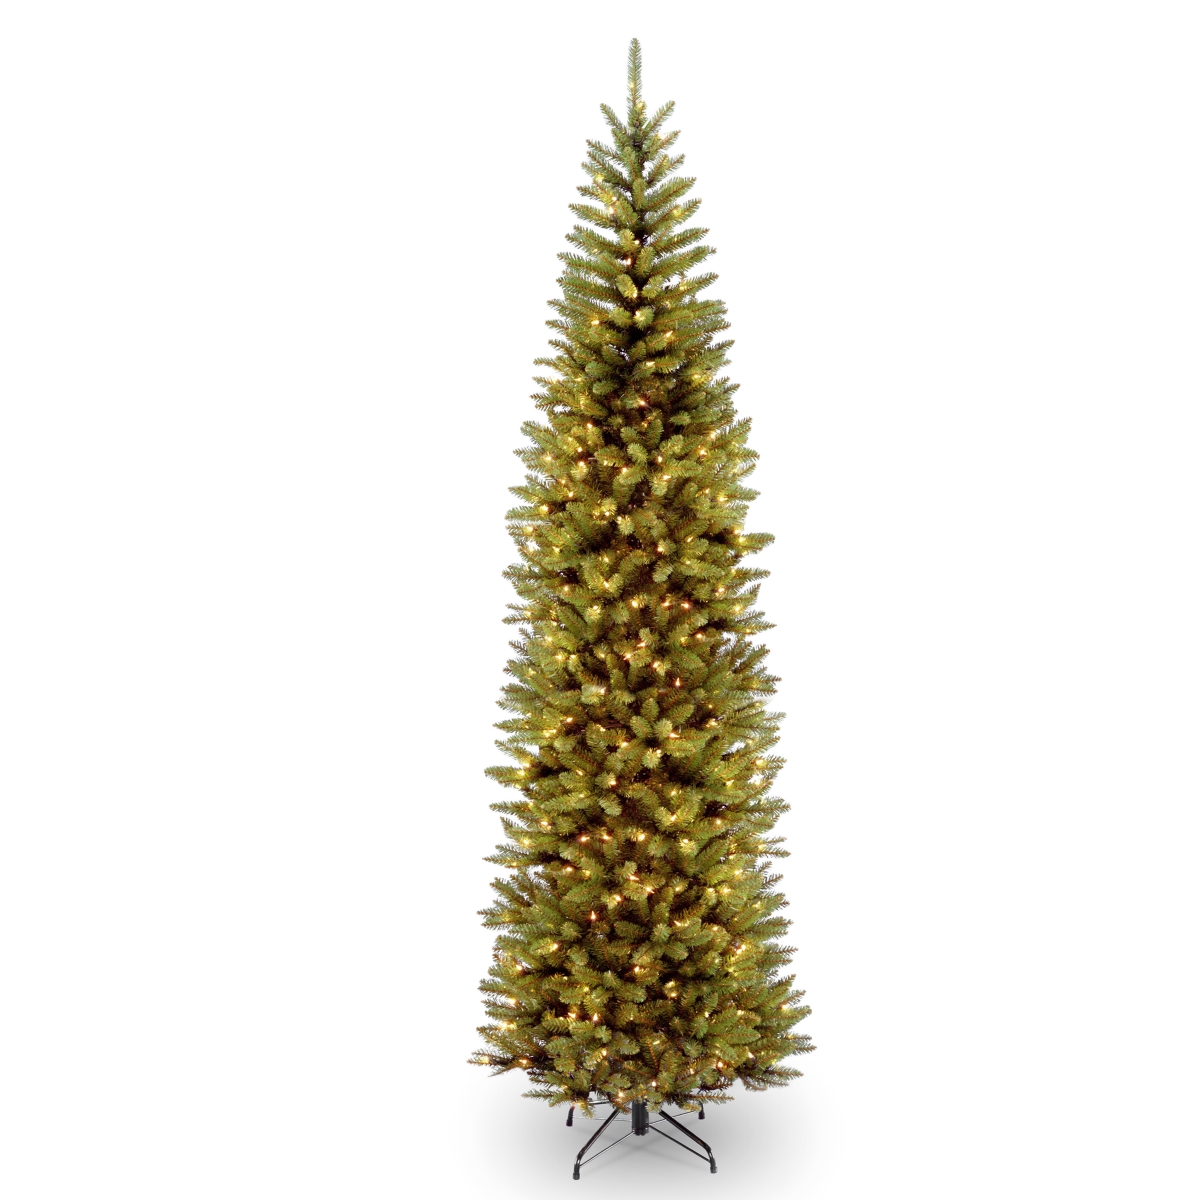 10 Ft. Kingswood Fir Pencil Tree With 600 Clear Lights